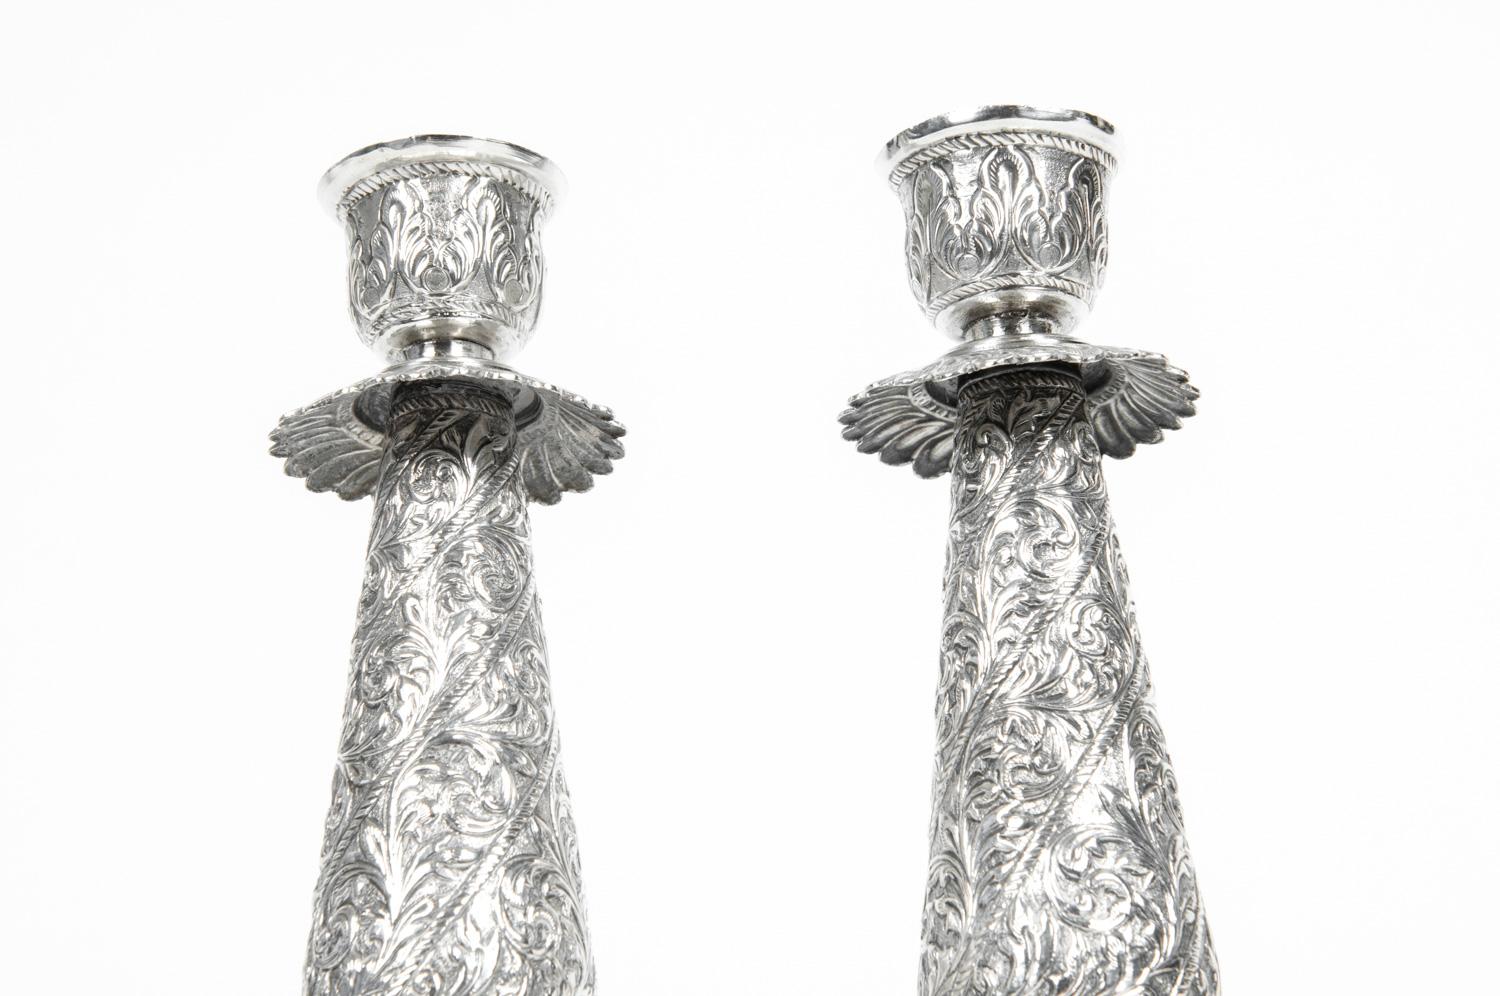 Antique Sterling Silver Pair of Candlesticks 1